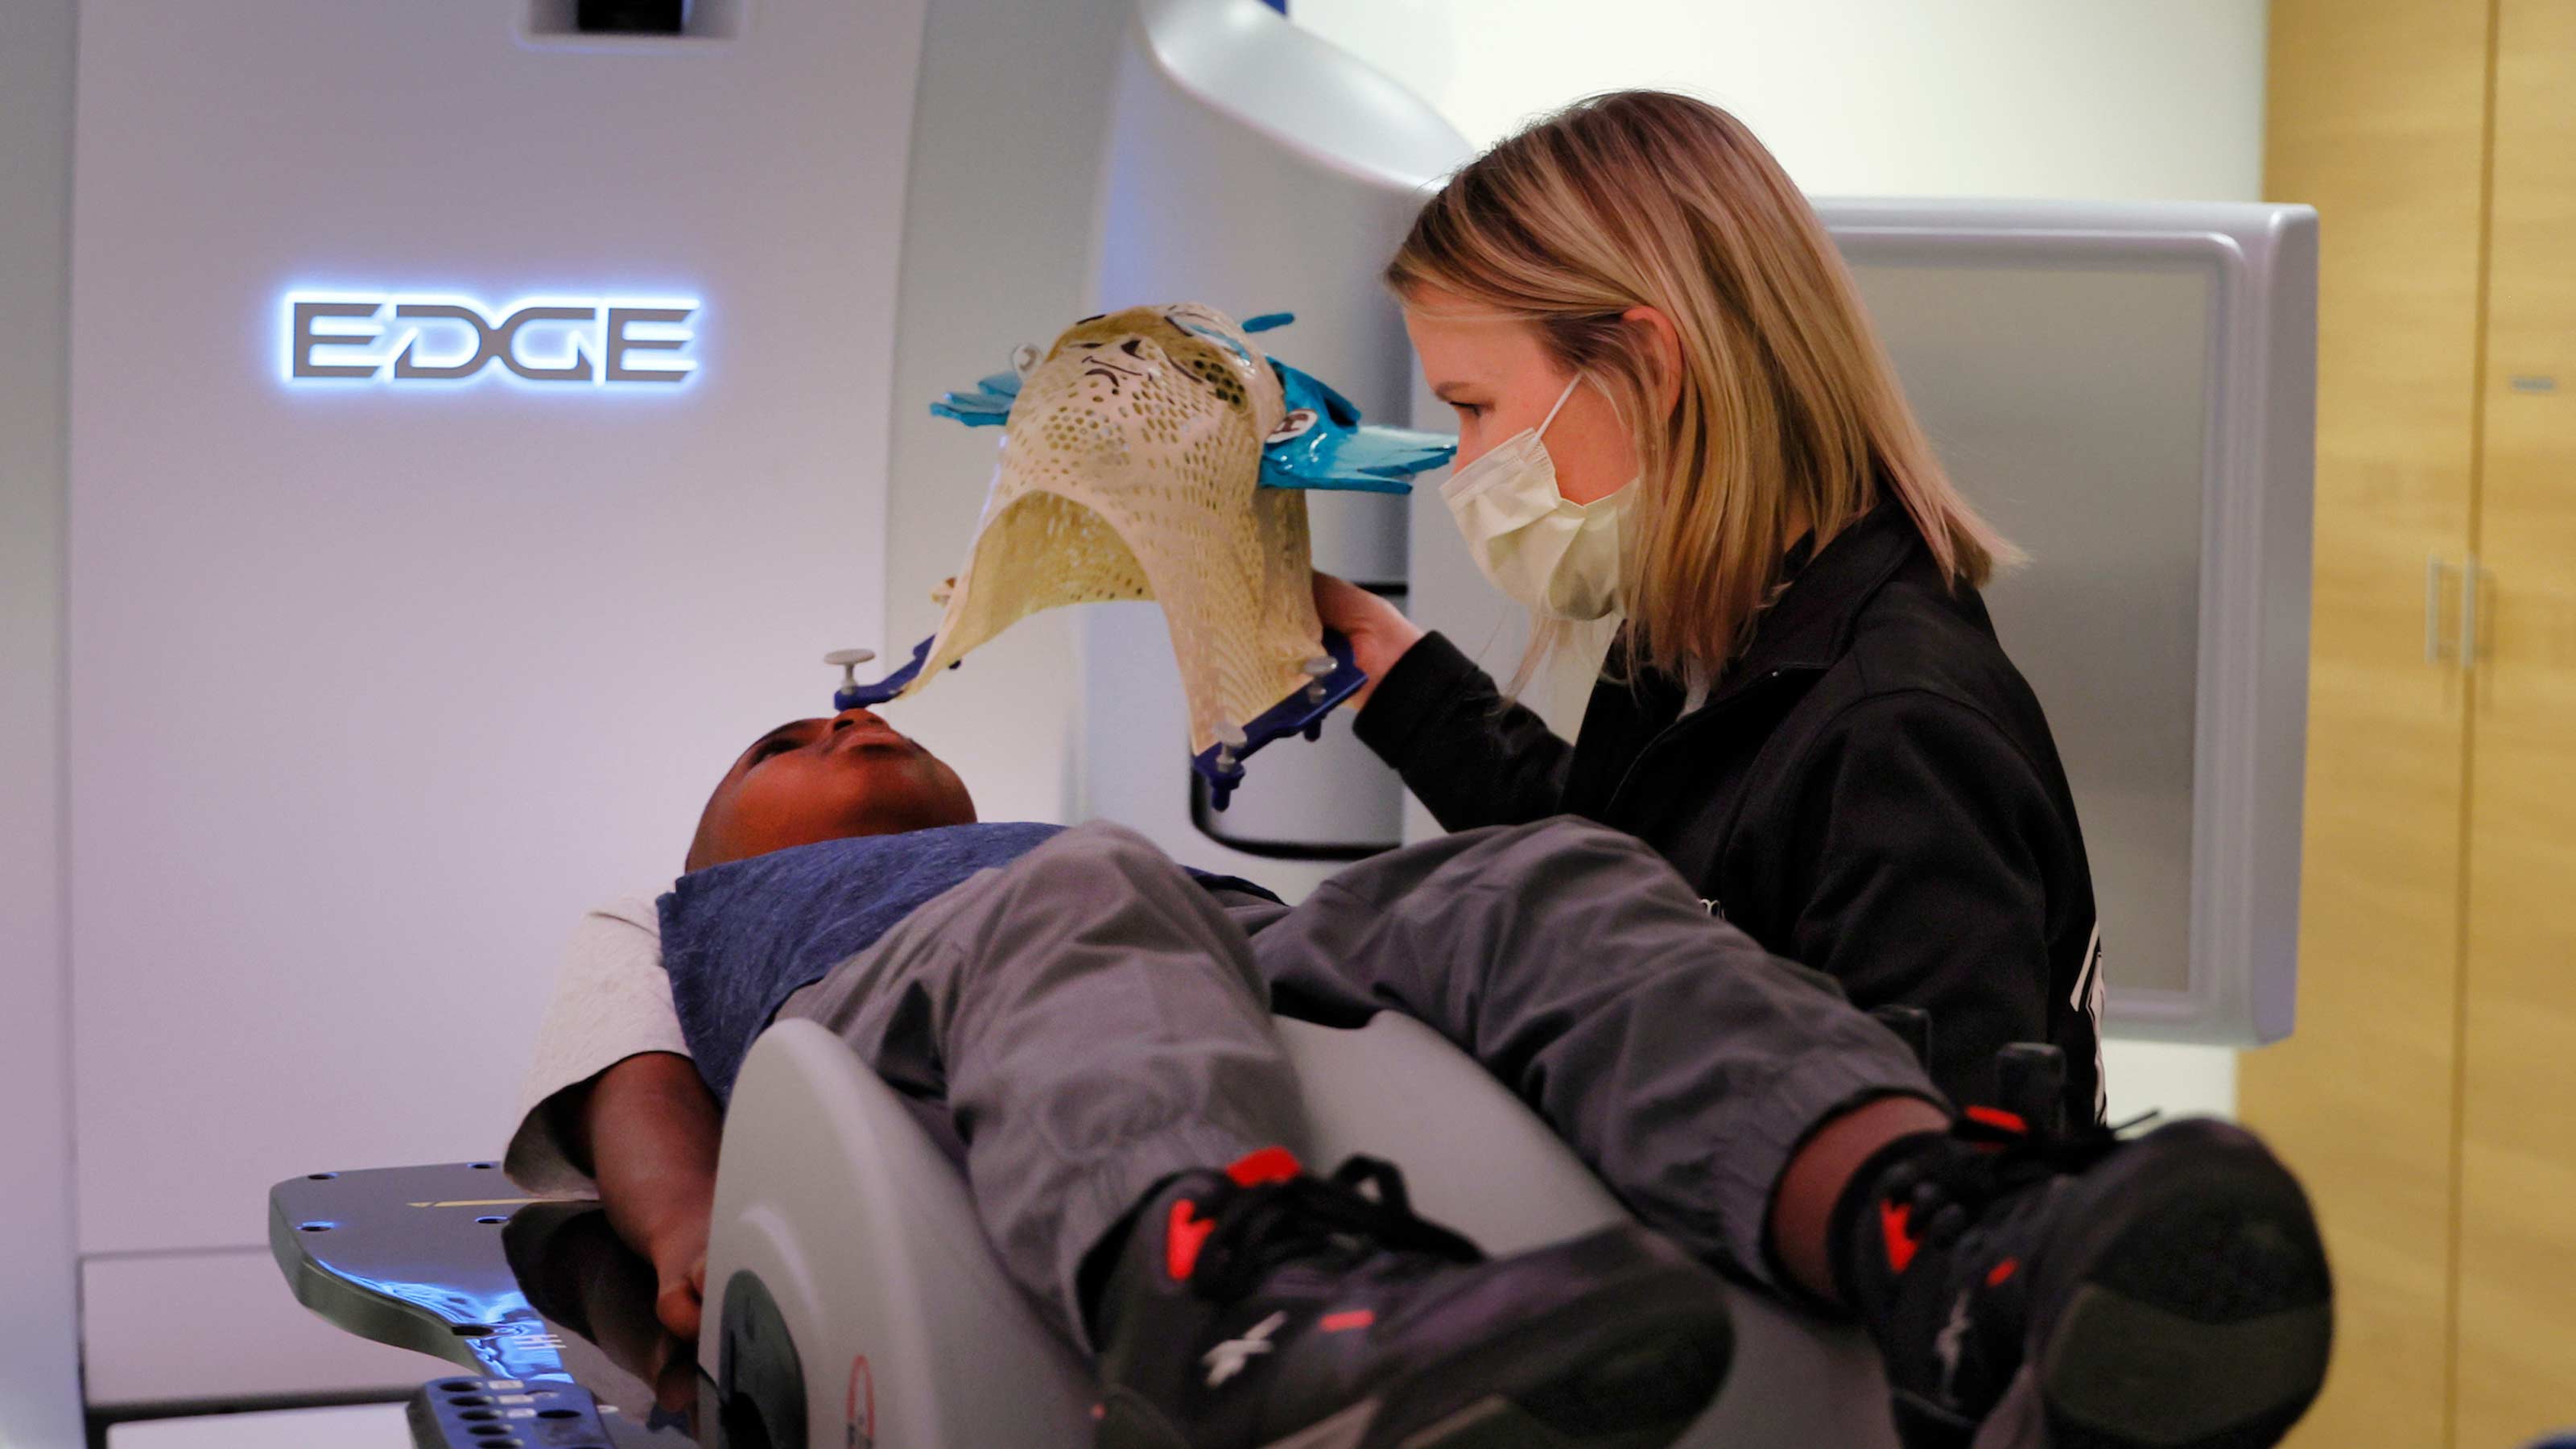 Julie Banner putting a mask on a pediatric cancer patient during treatment